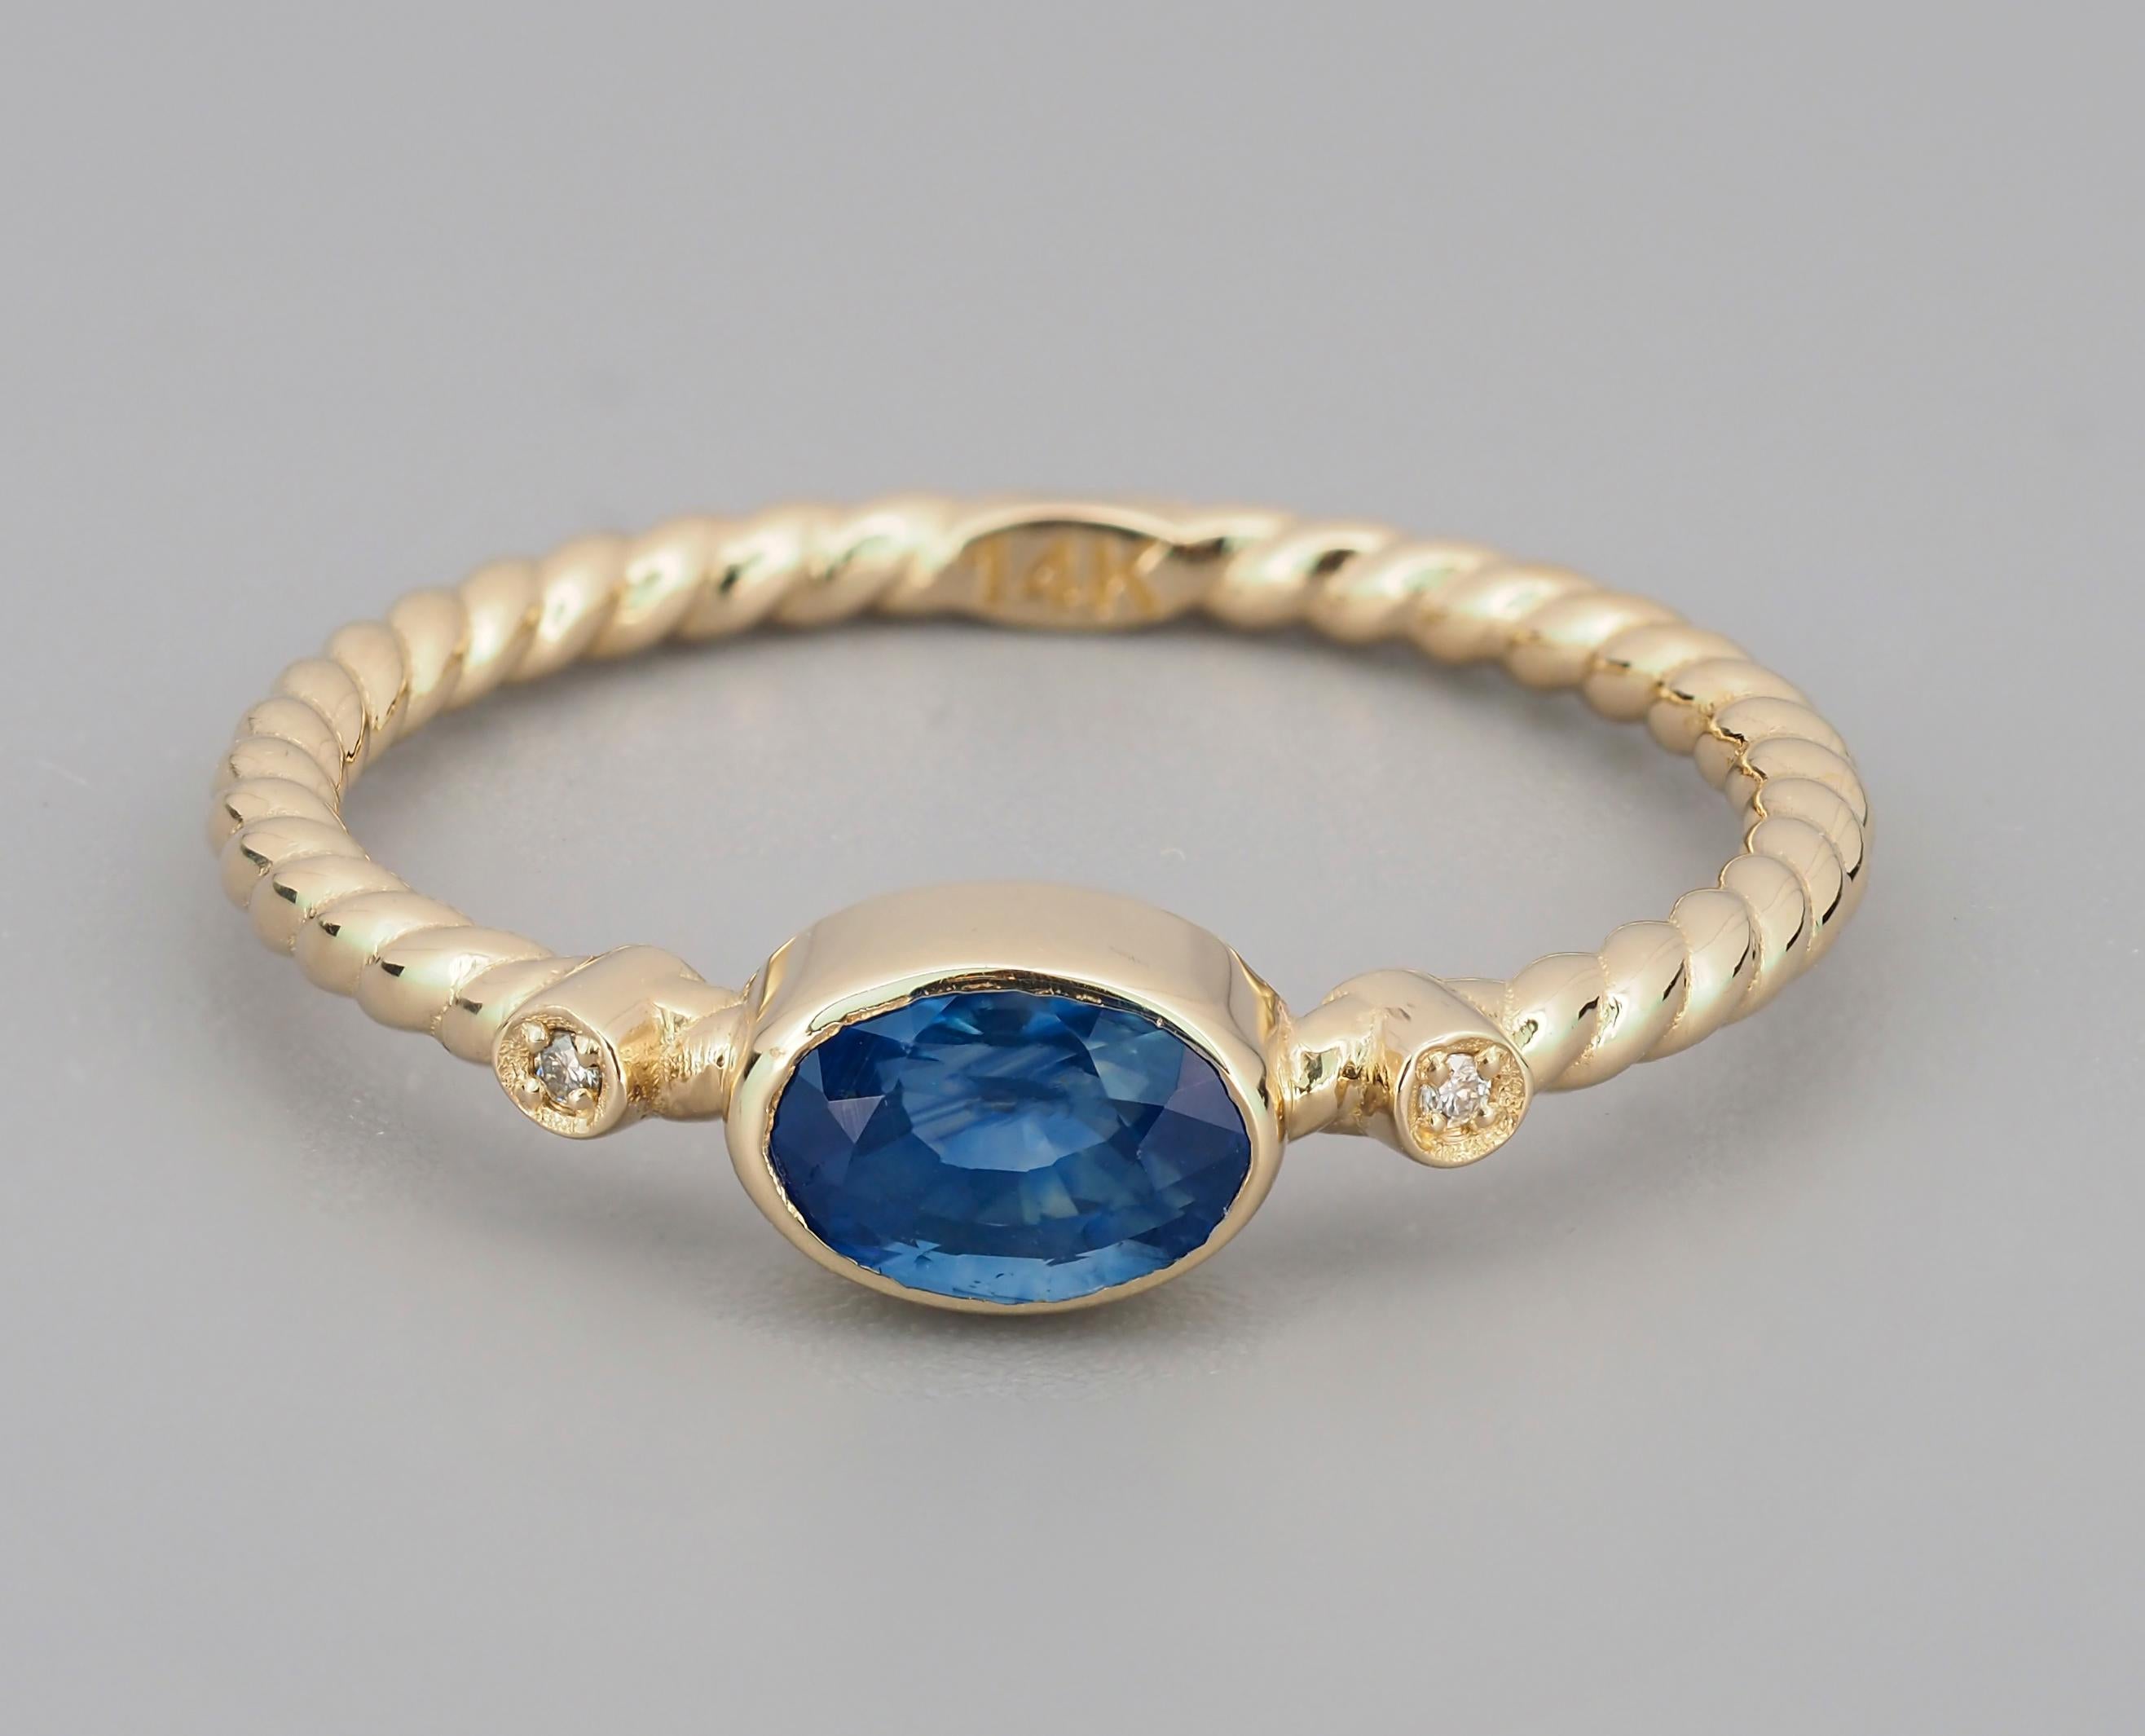 Blue sapphire ring in 14k gold. Stackable sapphire ring. Minimalist sapphire ring. Blue gemstone ring. Oval sapphire ring. Genuine sapphire ring.

Metal: 14k solid gold.
Weight: 1.8 (depends from size).
Set with sapphire, color - blue
oval cut,